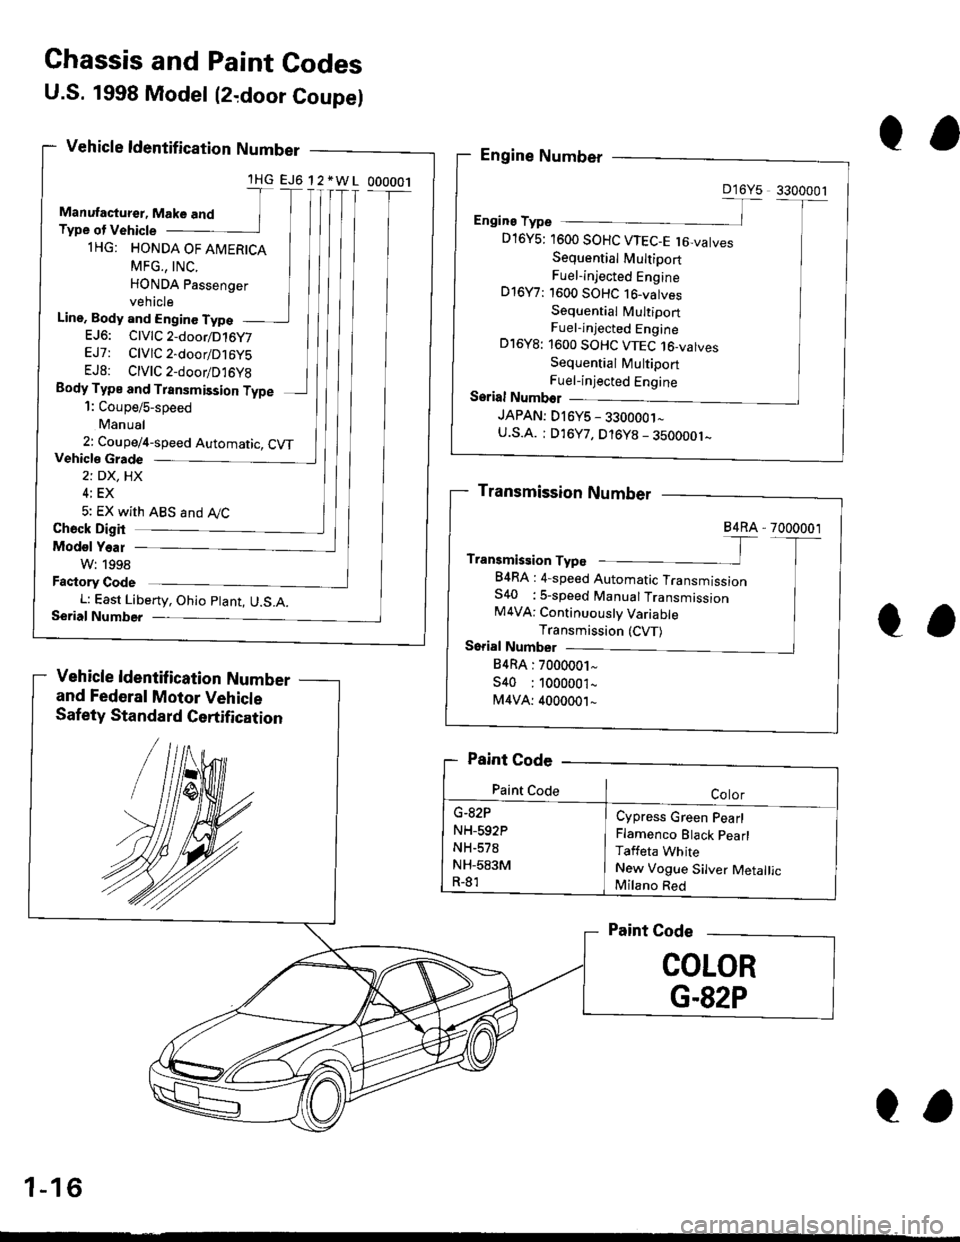 HONDA CIVIC 2000 6.G User Guide Ghassis and Paint Codes
U.S. 1998 Model (2,door Coupel
Vehicle ldentif ication Number
and Federal Motor Vehicle
Safety Standard Certification
lHG EJ6 12*WL 000001
Line, Body and Enginc TypeEJ6: ClVlC2